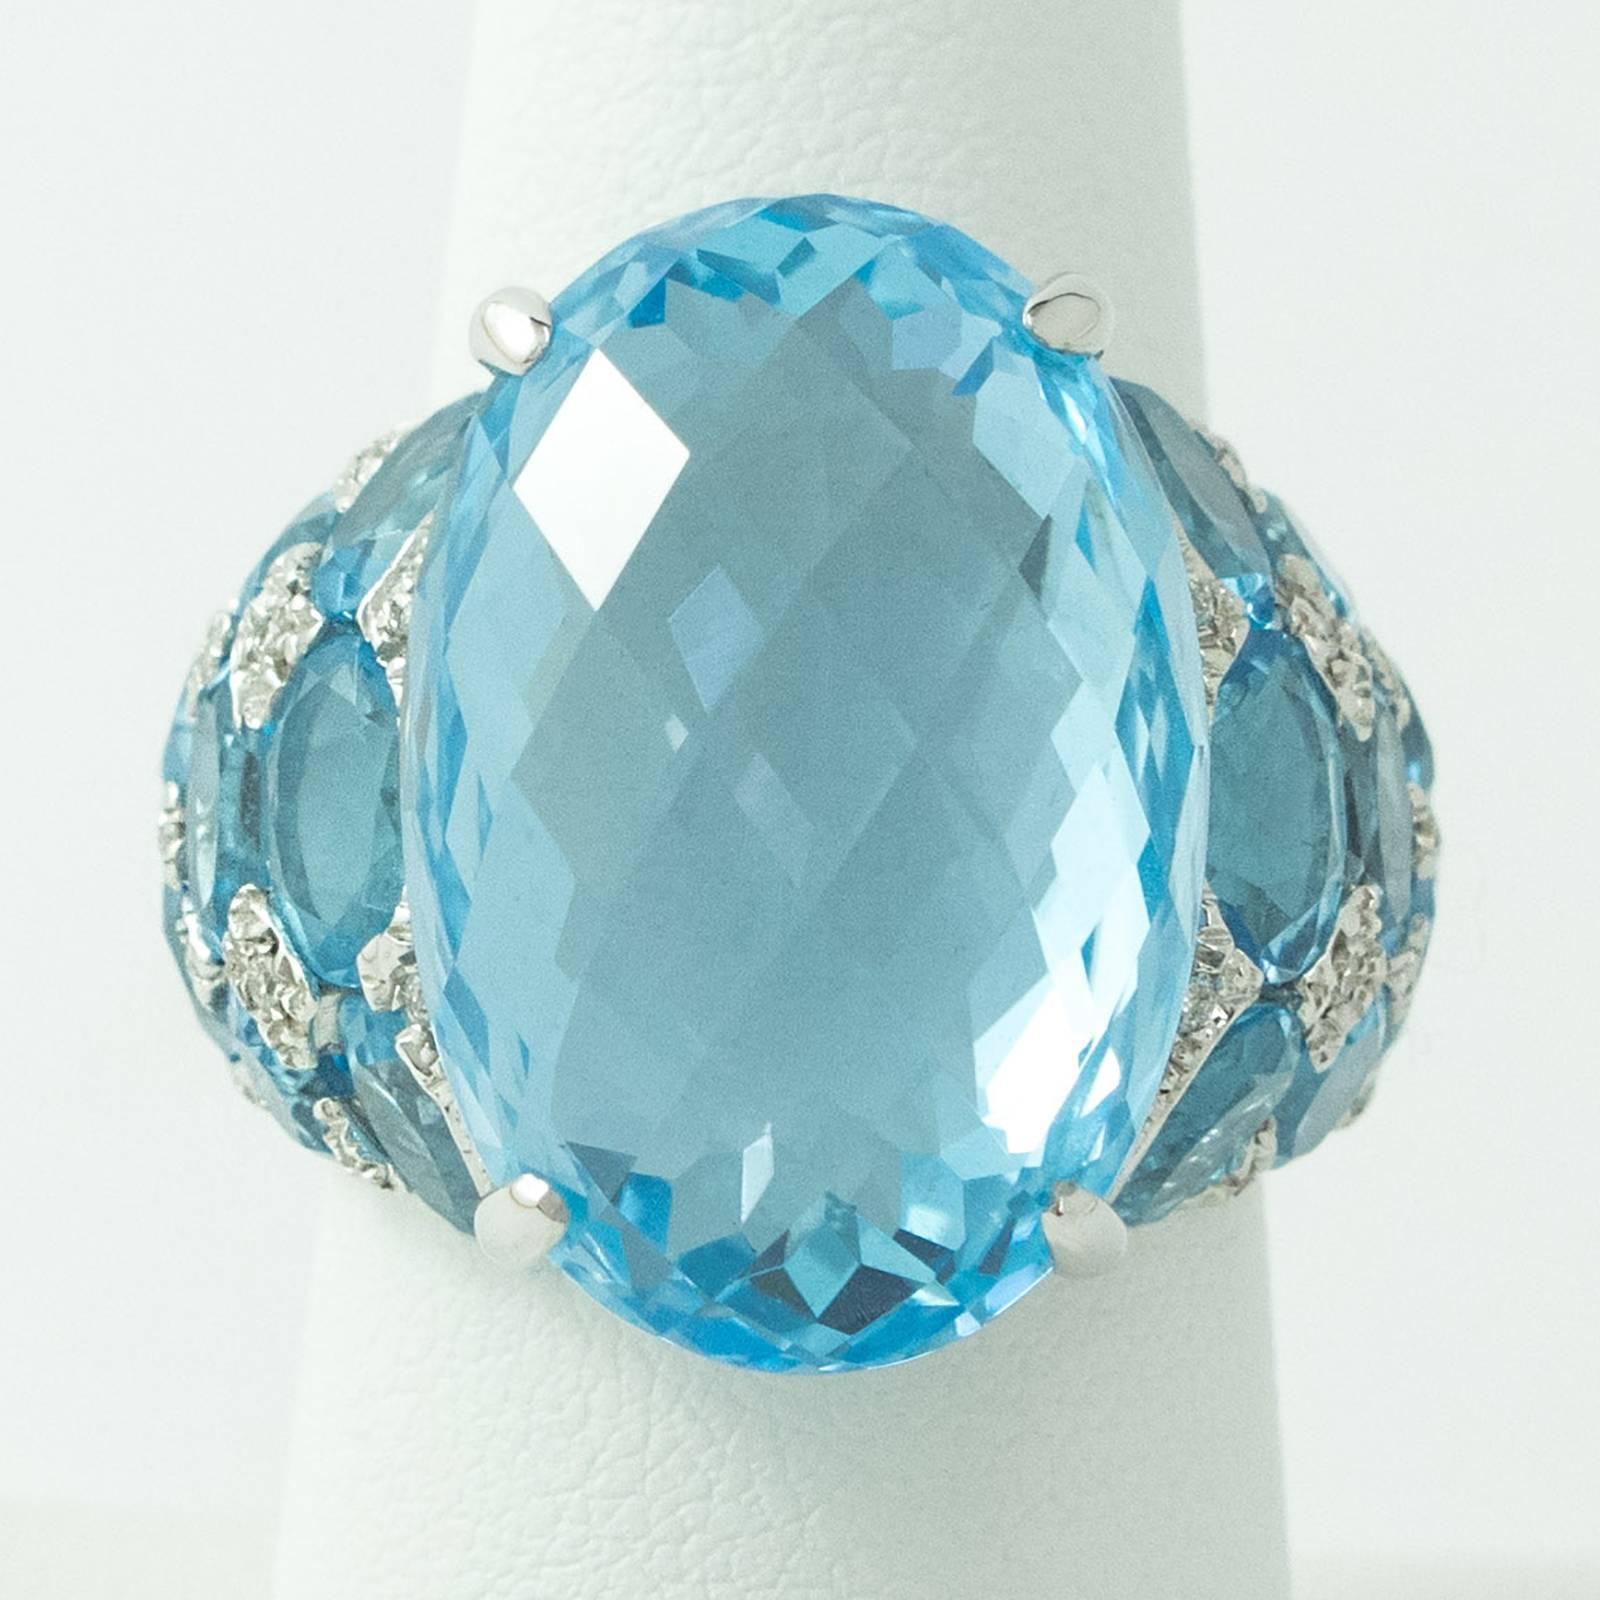 A dramatic Blue Topaz and Diamond White Gold Ring. This large 18K white gold ring is prong set with one Oval cut Blue Topaz measuring 22.20mm north to south and rising10.00 mm up off the top of the finger. The sides are further set with sixteen